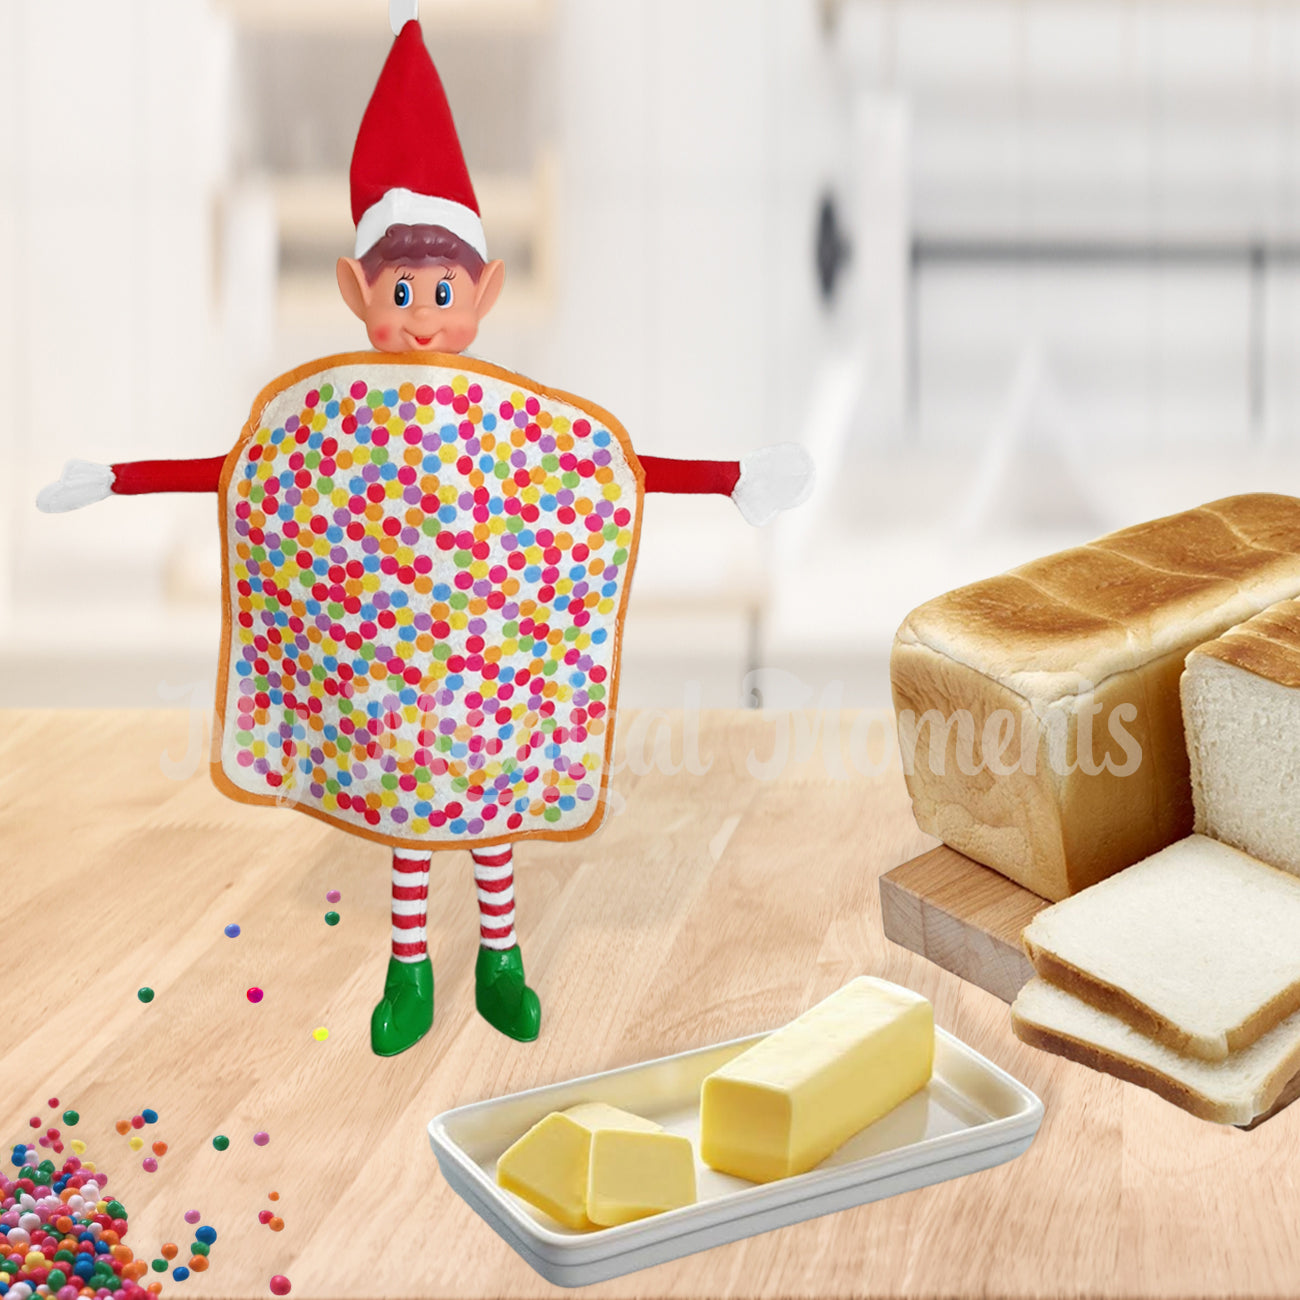 Elves behavin badly wearing a fairy bread costume making fairy bread in the kitchen